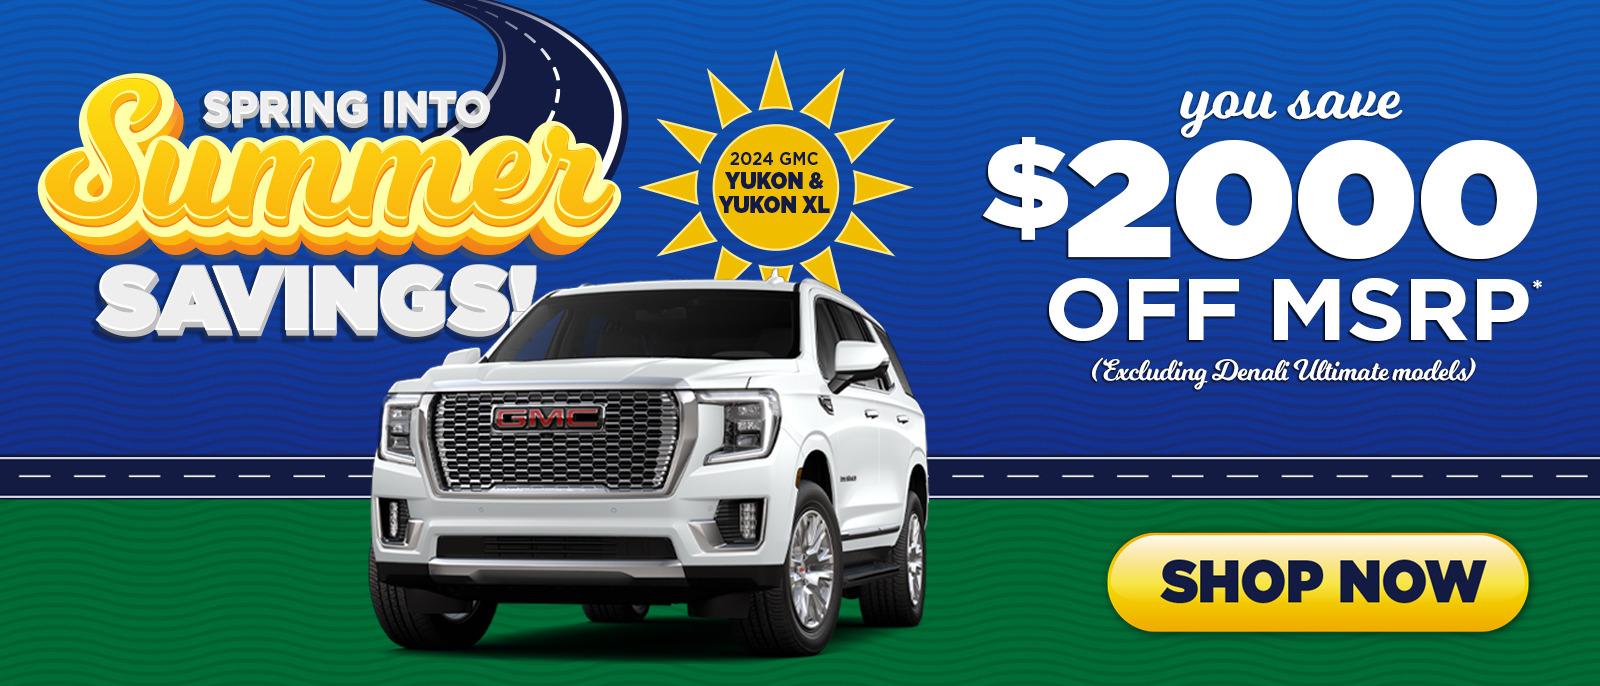 2024 GMC Yukon and Yukon XL: You Save $2000 Off MSRP (excluding Denali Ultimate models)